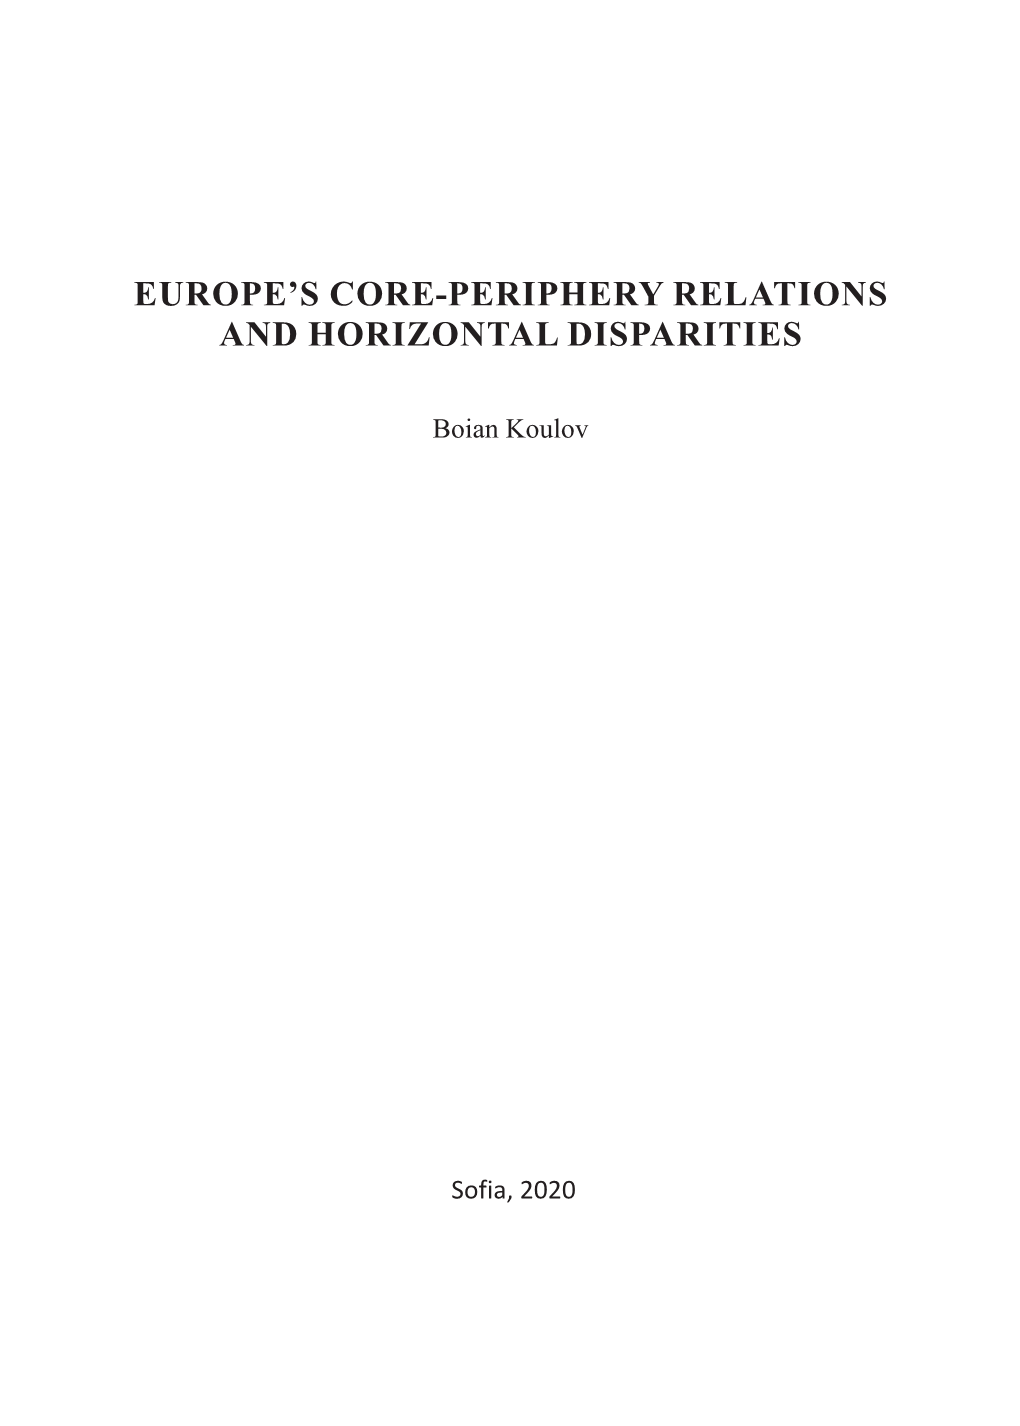 Europe's Core-Periphery Relations and Horizontal